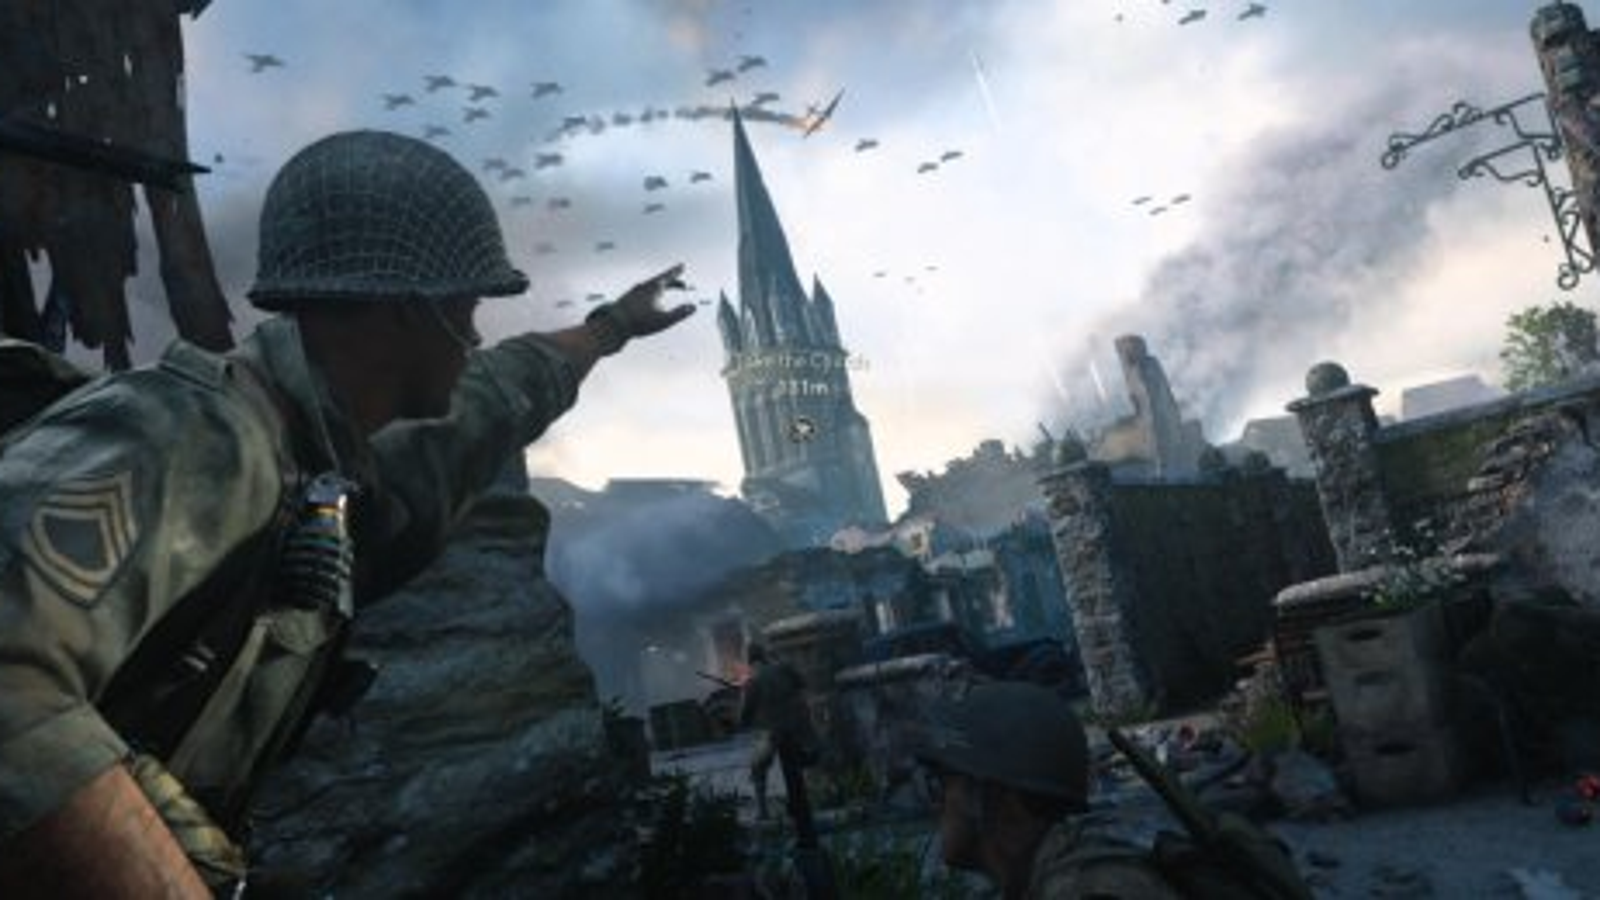 Call of Duty WWII at the best price